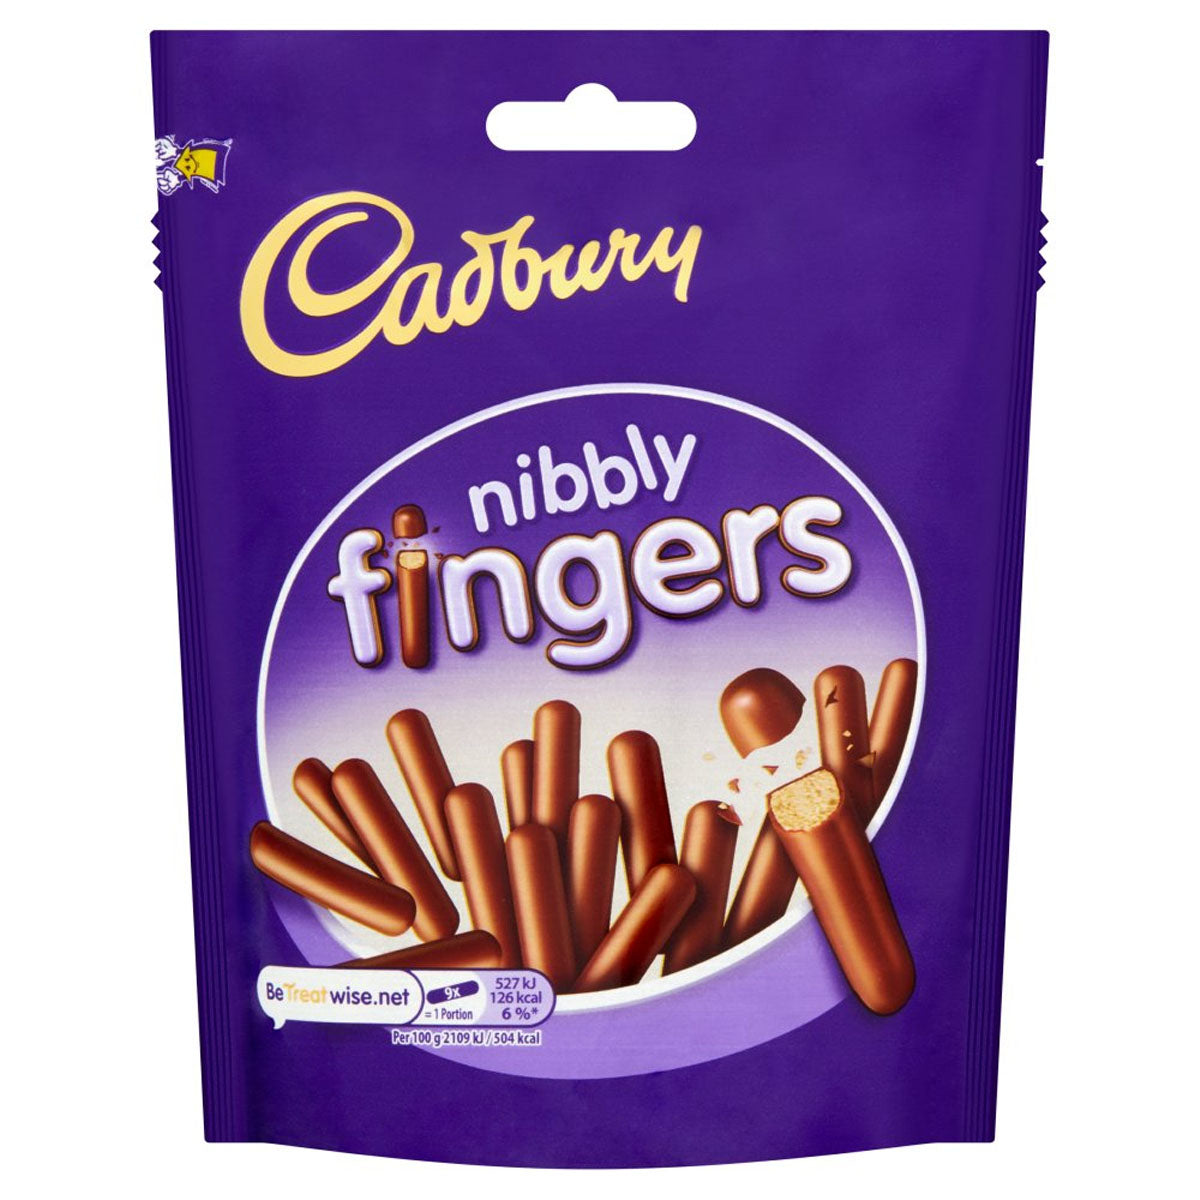 A bag of Cadbury - Nibbly Chocolate Mini Fingers Biscuits - 125g on a white background.